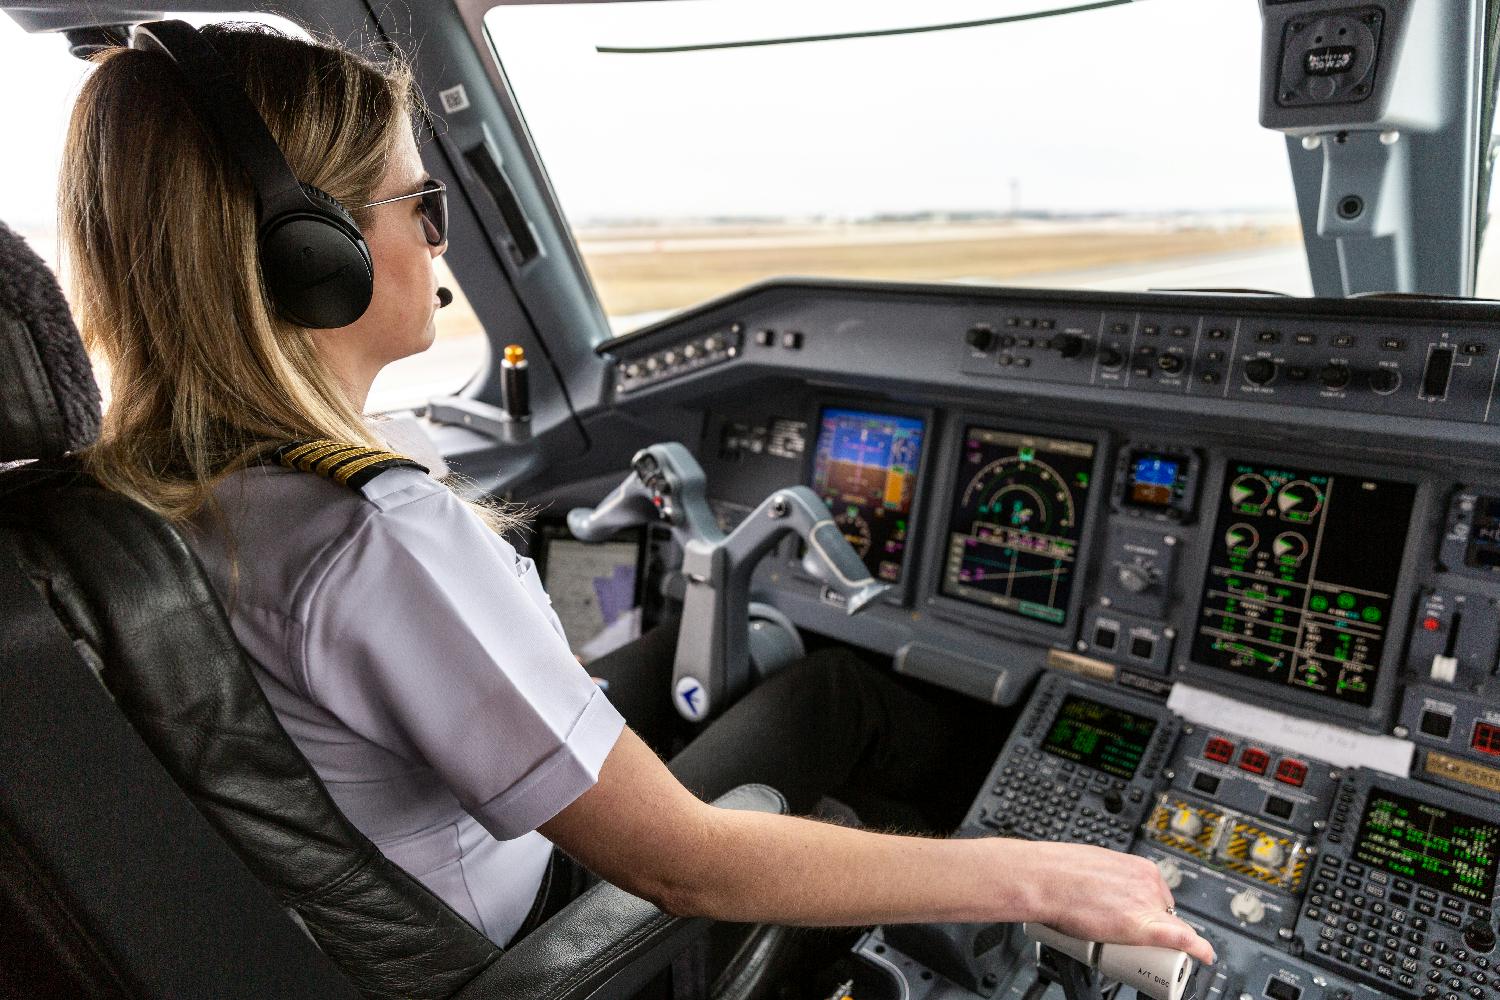 SkyWest supports career advancement and opportunity for all of its employees.